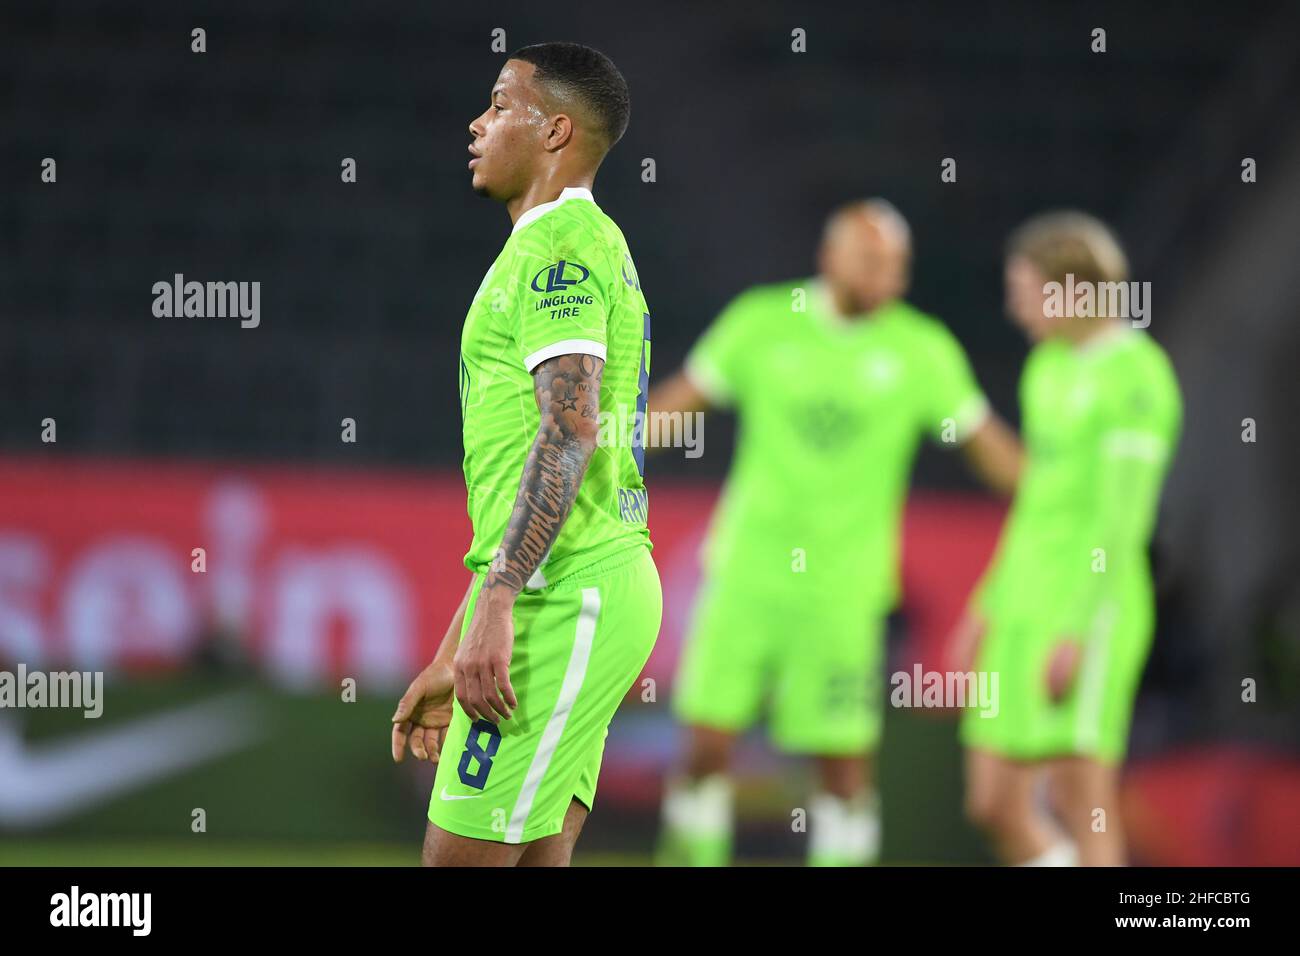 Wolfsburg, Germany. 15th Jan, 2022. Soccer: Bundesliga, VfL Wolfsburg - Hertha BSC, Matchday 19 at Volkswagen Arena. Wolfsburg's Aster Vranckx leaves the field after the match. The match ended 0:0. Credit: Swen Pförtner/dpa - IMPORTANT NOTE: In accordance with the requirements of the DFL Deutsche Fußball Liga and the DFB Deutscher Fußball-Bund, it is prohibited to use or have used photographs taken in the stadium and/or of the match in the form of sequence pictures and/or video-like photo series./dpa/Alamy Live News Stock Photo